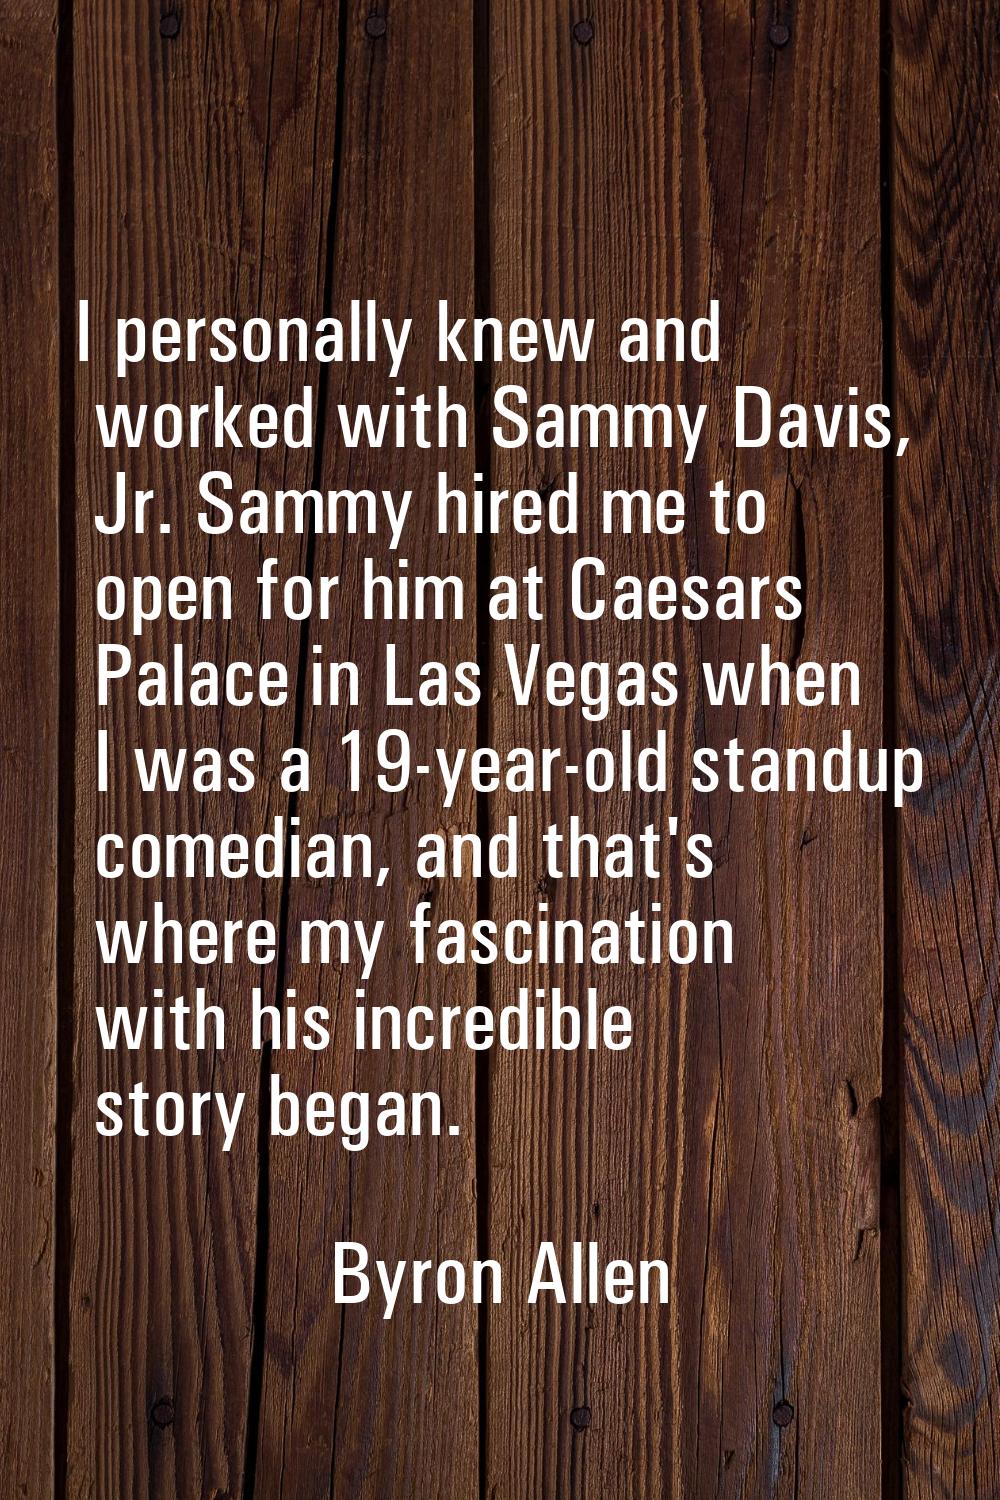 I personally knew and worked with Sammy Davis, Jr. Sammy hired me to open for him at Caesars Palace